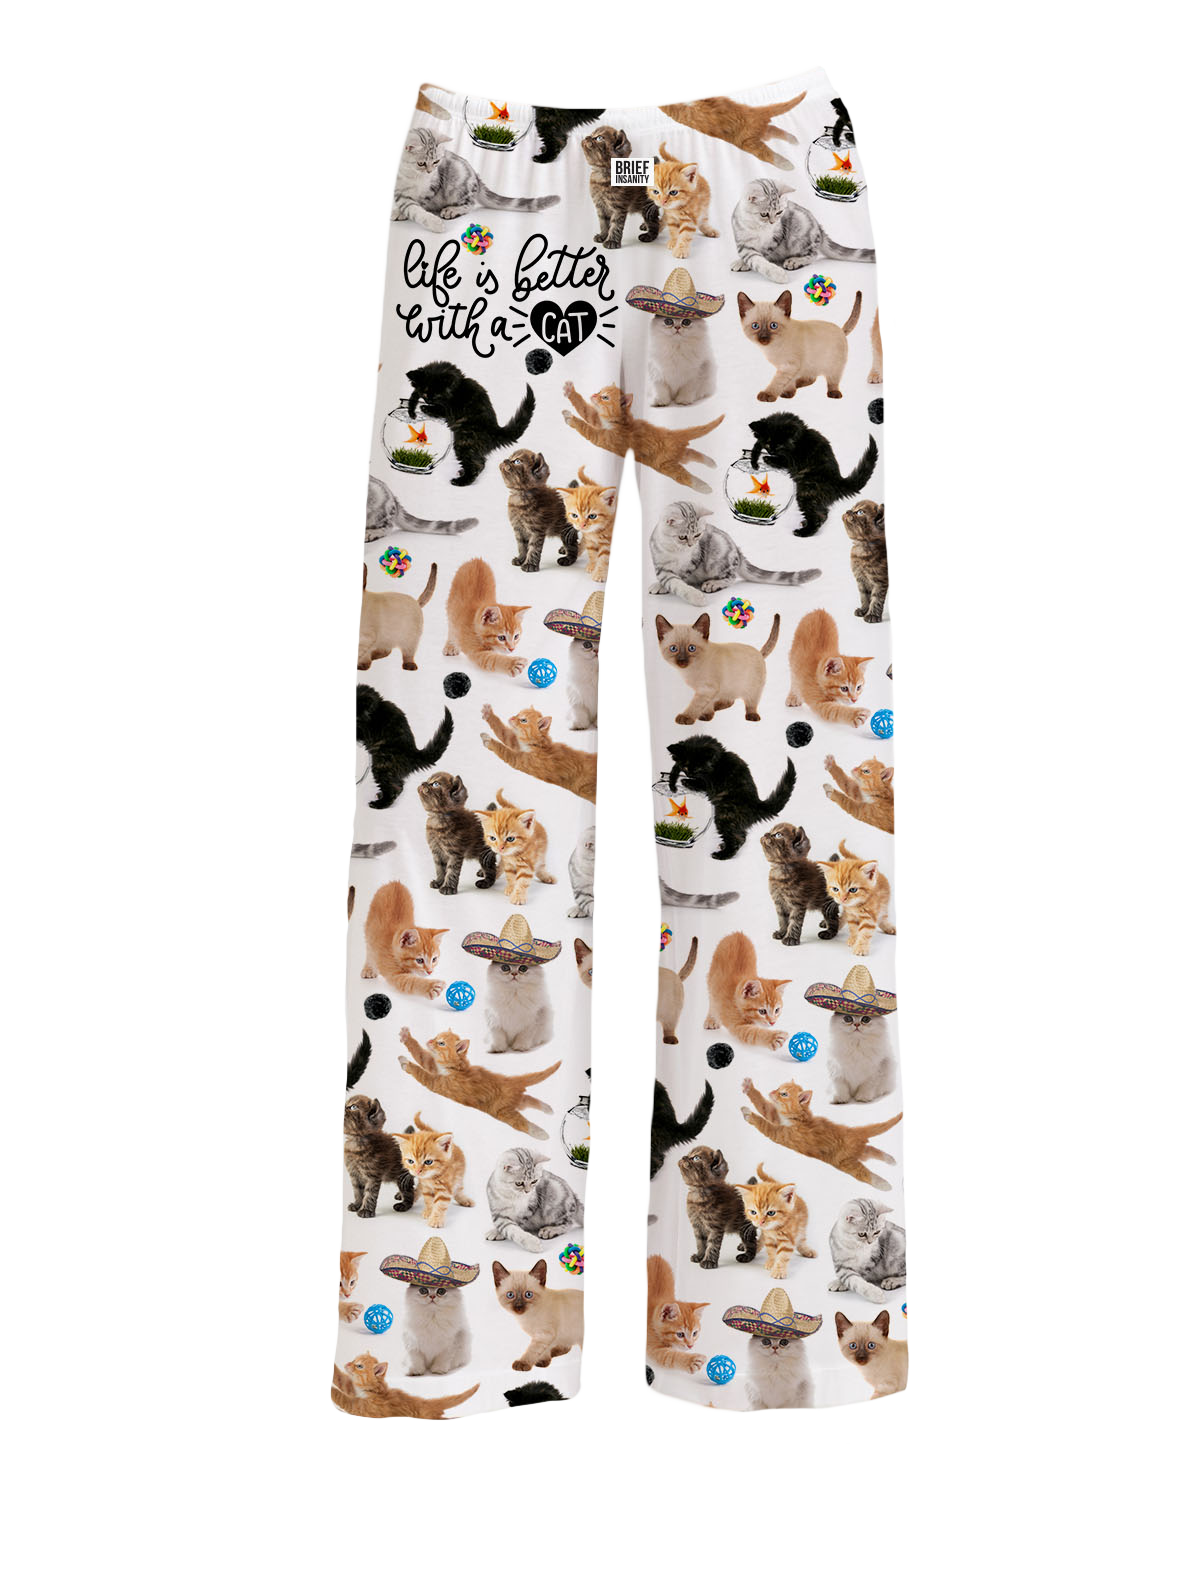 BRIEF INSANITY Lounge Pajama Pants for Men and Women  Golf & Beer Print  Bottoms - Funny, Humorous, Novelty Loungewear (Golf Beer, Small) at   Women's Clothing store